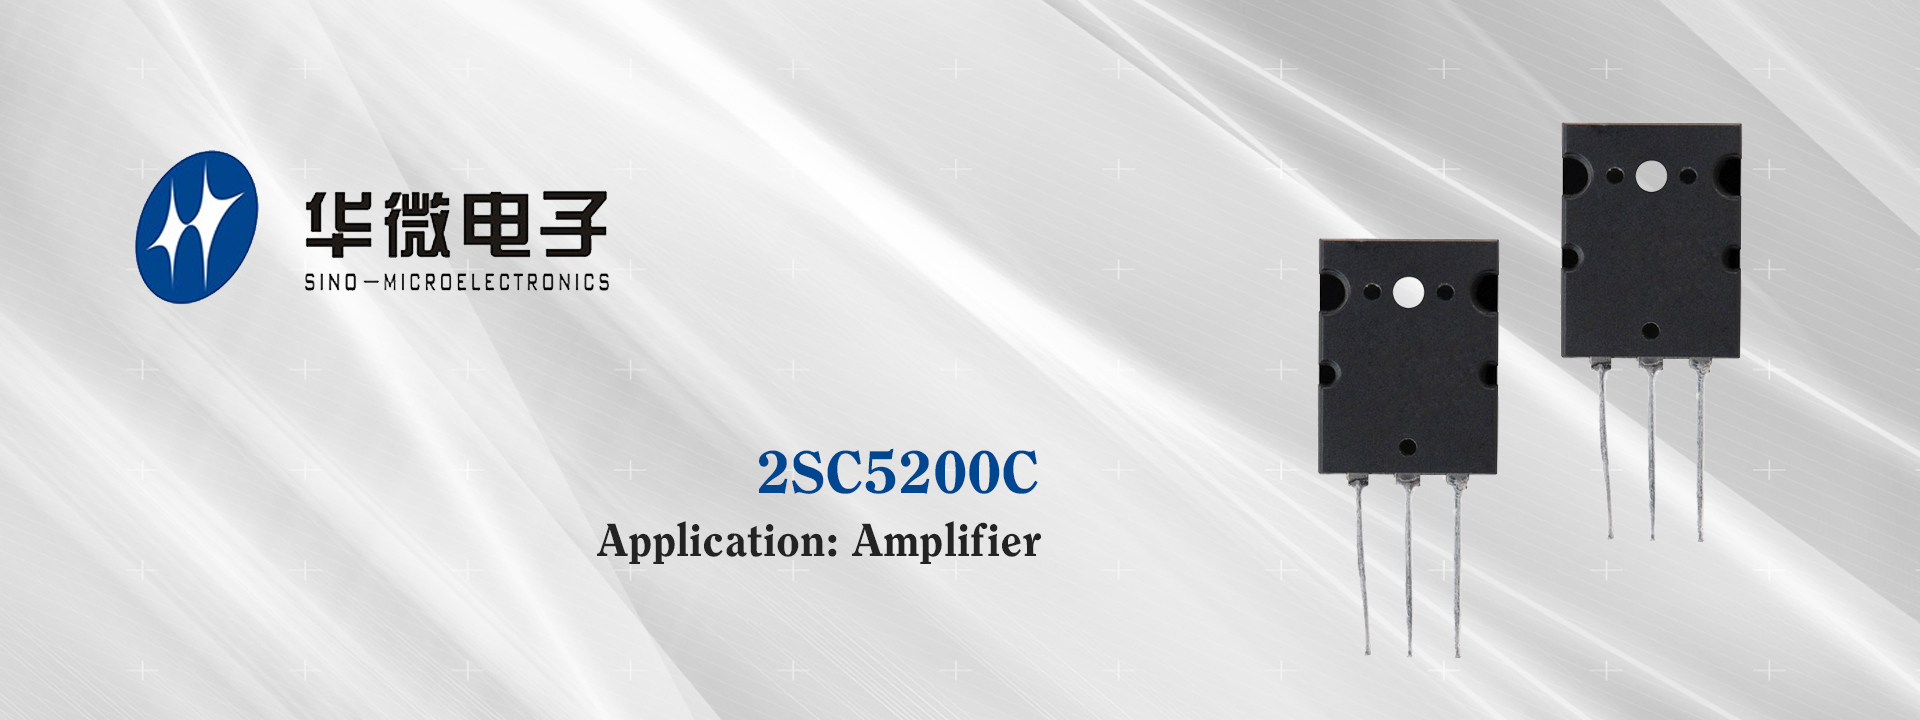 SINO-MICROELECTRONICS 2SC5200C for Amplifier